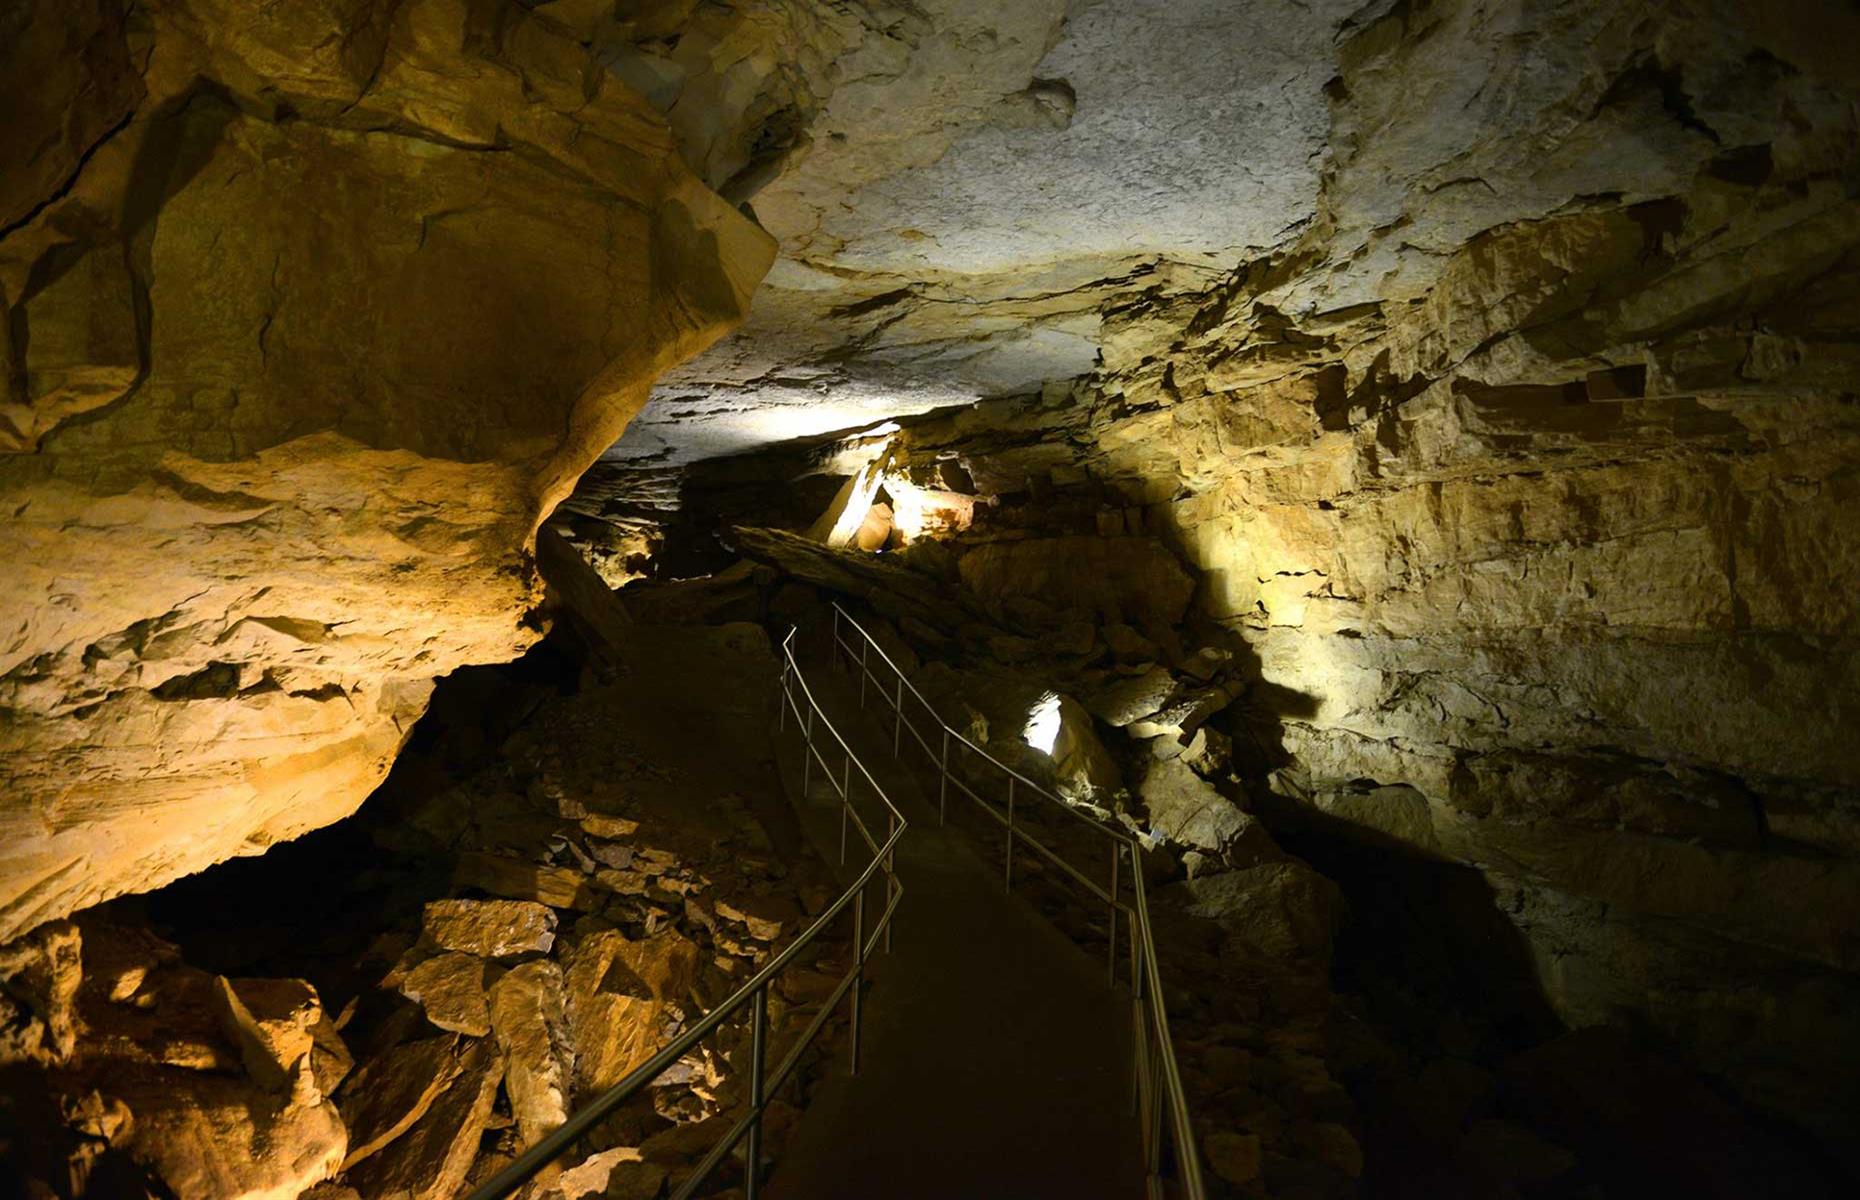 <p>It took nearly 15 painstaking years for workers to blast this 2,000-foot (610m) man-made cave out of solid rock. Created in the 1850s underneath the city of Lockport in New York, the chamber was designed to supply water from the Erie Canal to local industries. The underground boat ride has <a href="https://lockportcave.com/tour-schedules-pricing-covid/">currently been replaced</a> with a walking tour due to COVID-19 social distancing restrictions. Take a look at the <a href="https://www.loveexploring.com/galleries/74455/the-strangest-sights-in-the-usas-biggest-cities">strangest sights in America's biggest cities</a>.</p>